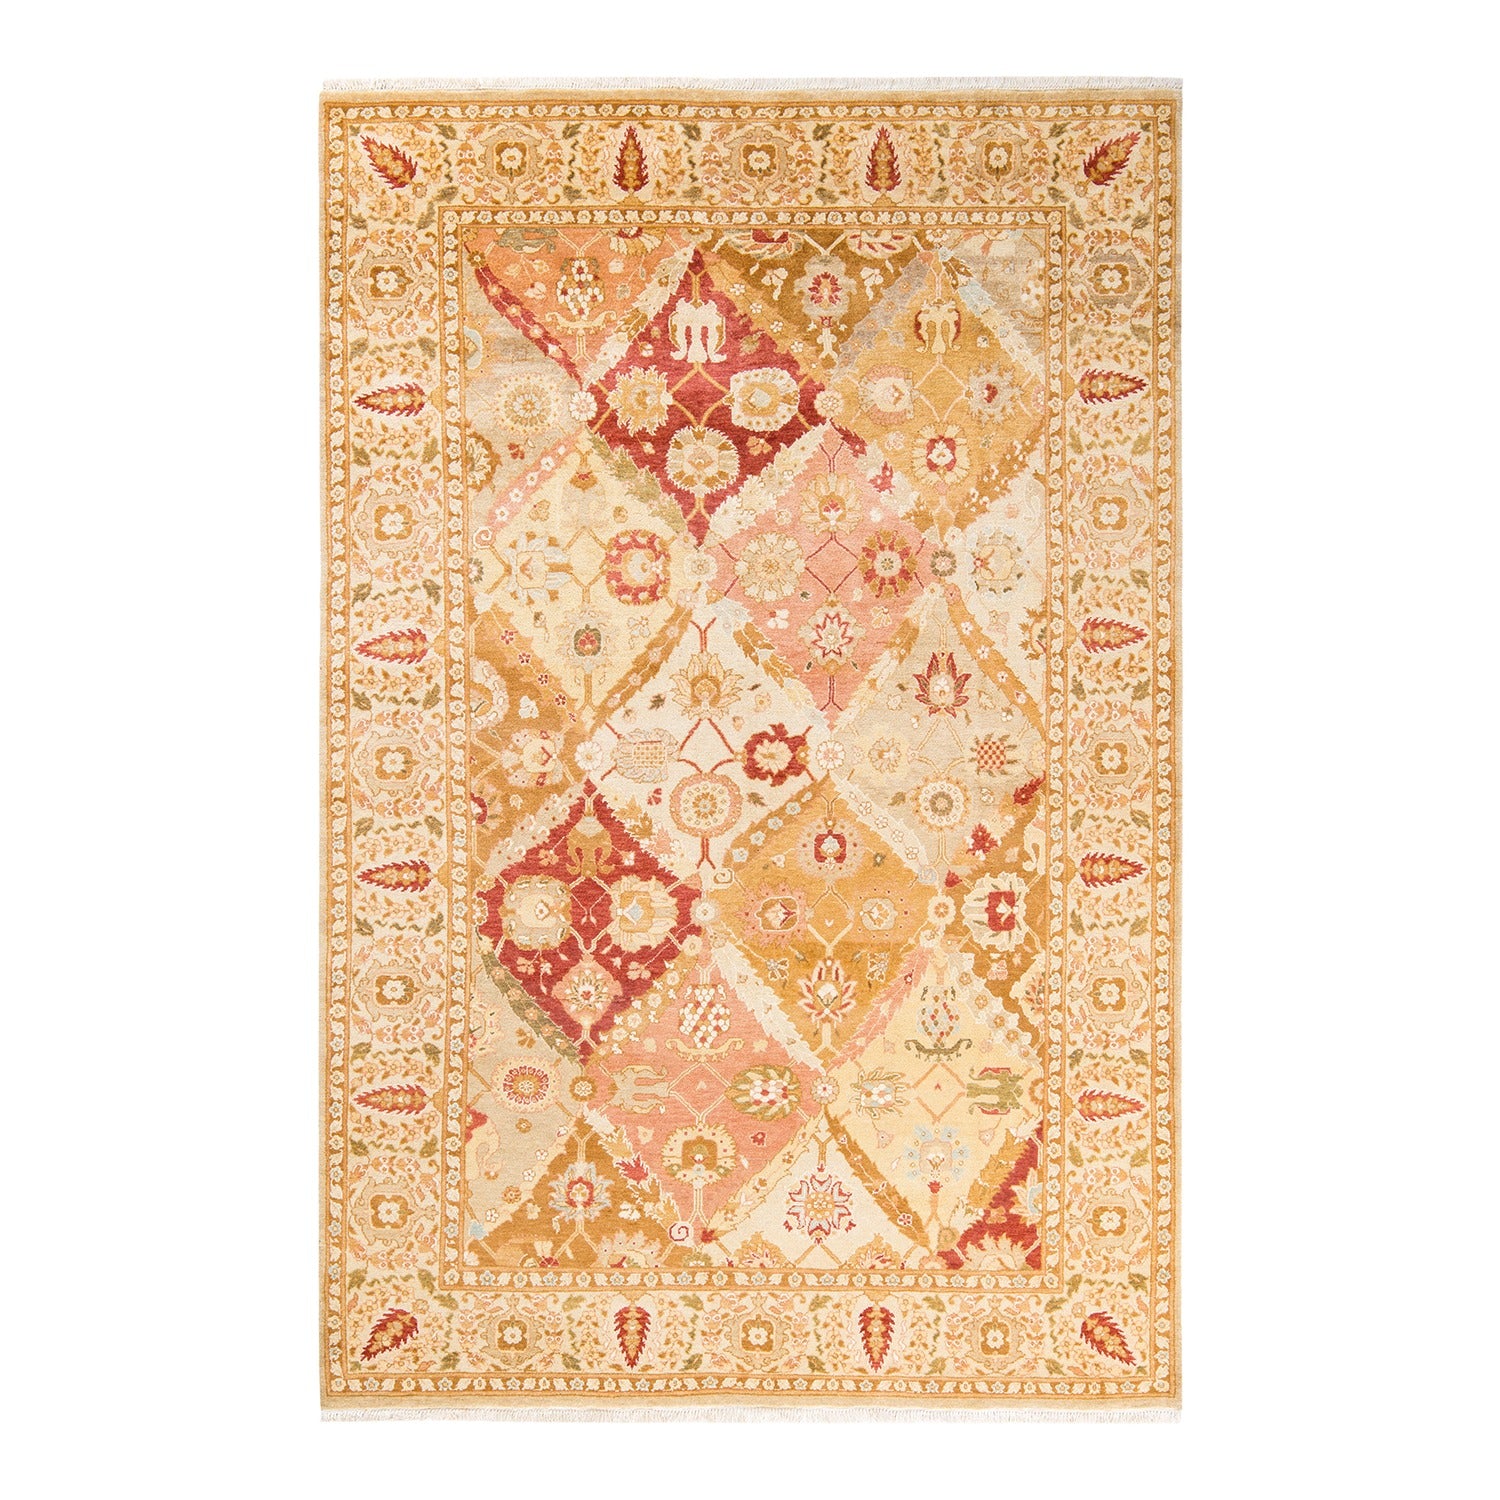 Exquisite Middle Eastern-inspired rug with intricate floral and geometric patterns.